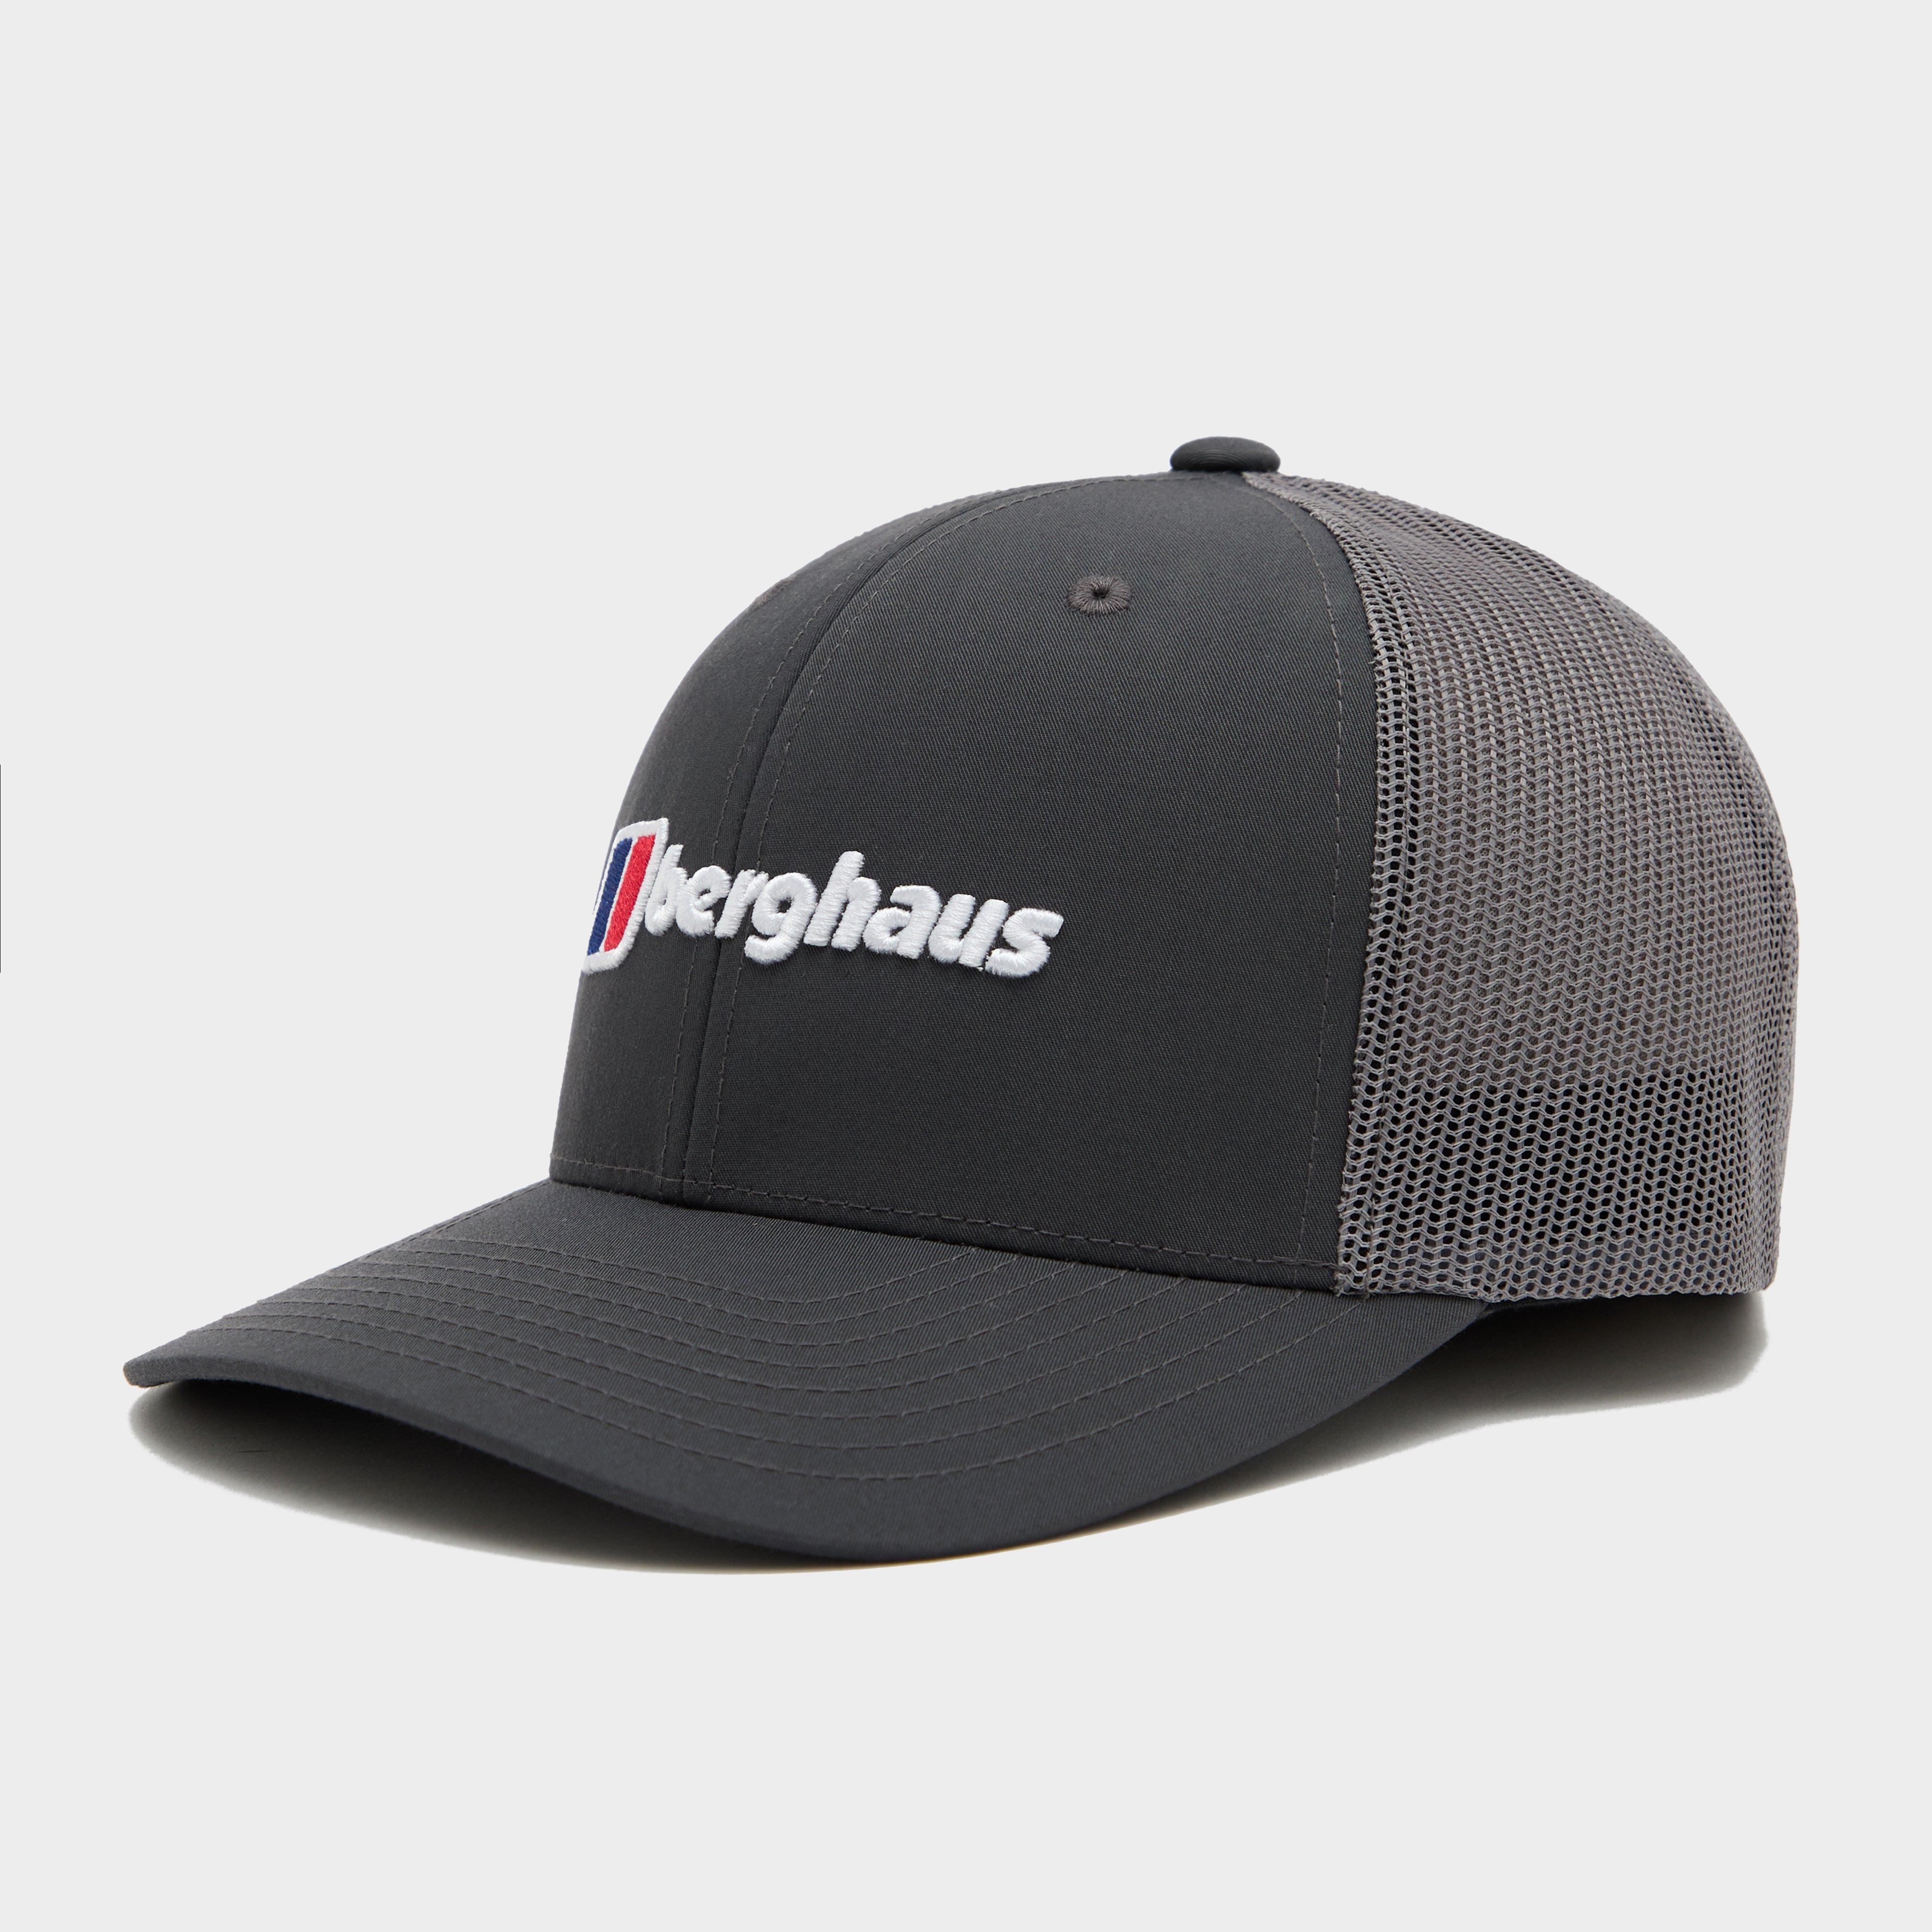 Berghaus Berghaus Recognition Cap - Gry, GRY